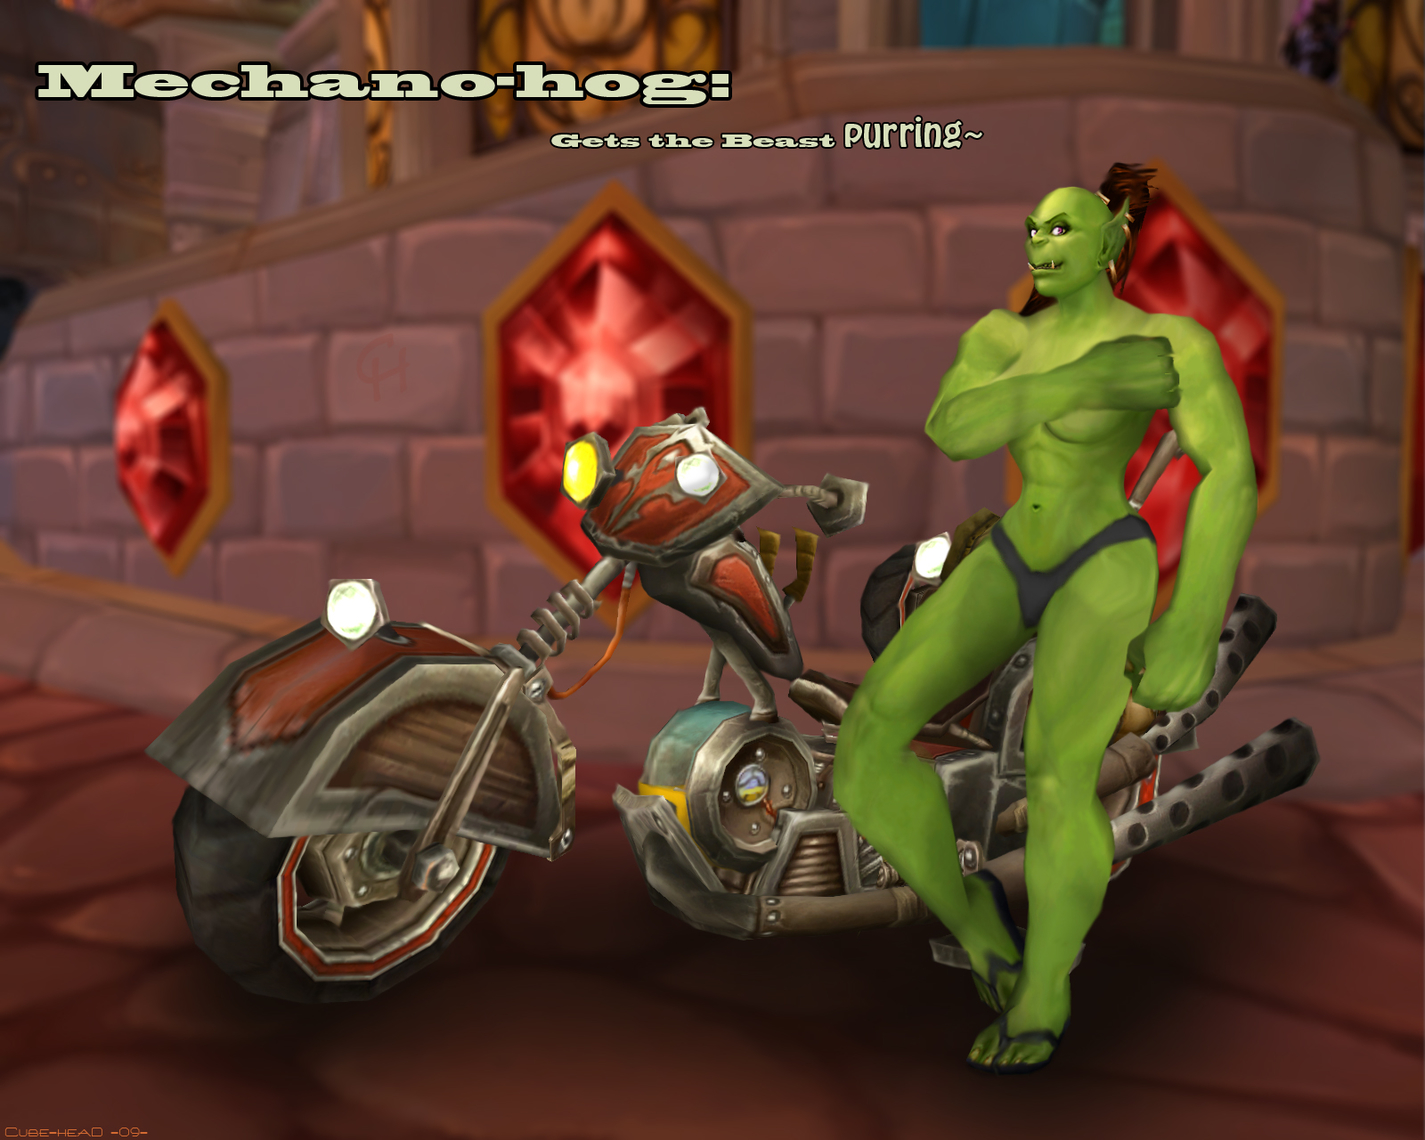 Mechona-hog Advert [Orc/Pinup/SFW]
Yes sir! They have arrived to the shops now!
We guarantee that this machine will make those hard skinned beasts
to purr at your feet just to get close to you while you ride on our Mechano-hog!
Keywords: Orc;Pinup;SFW